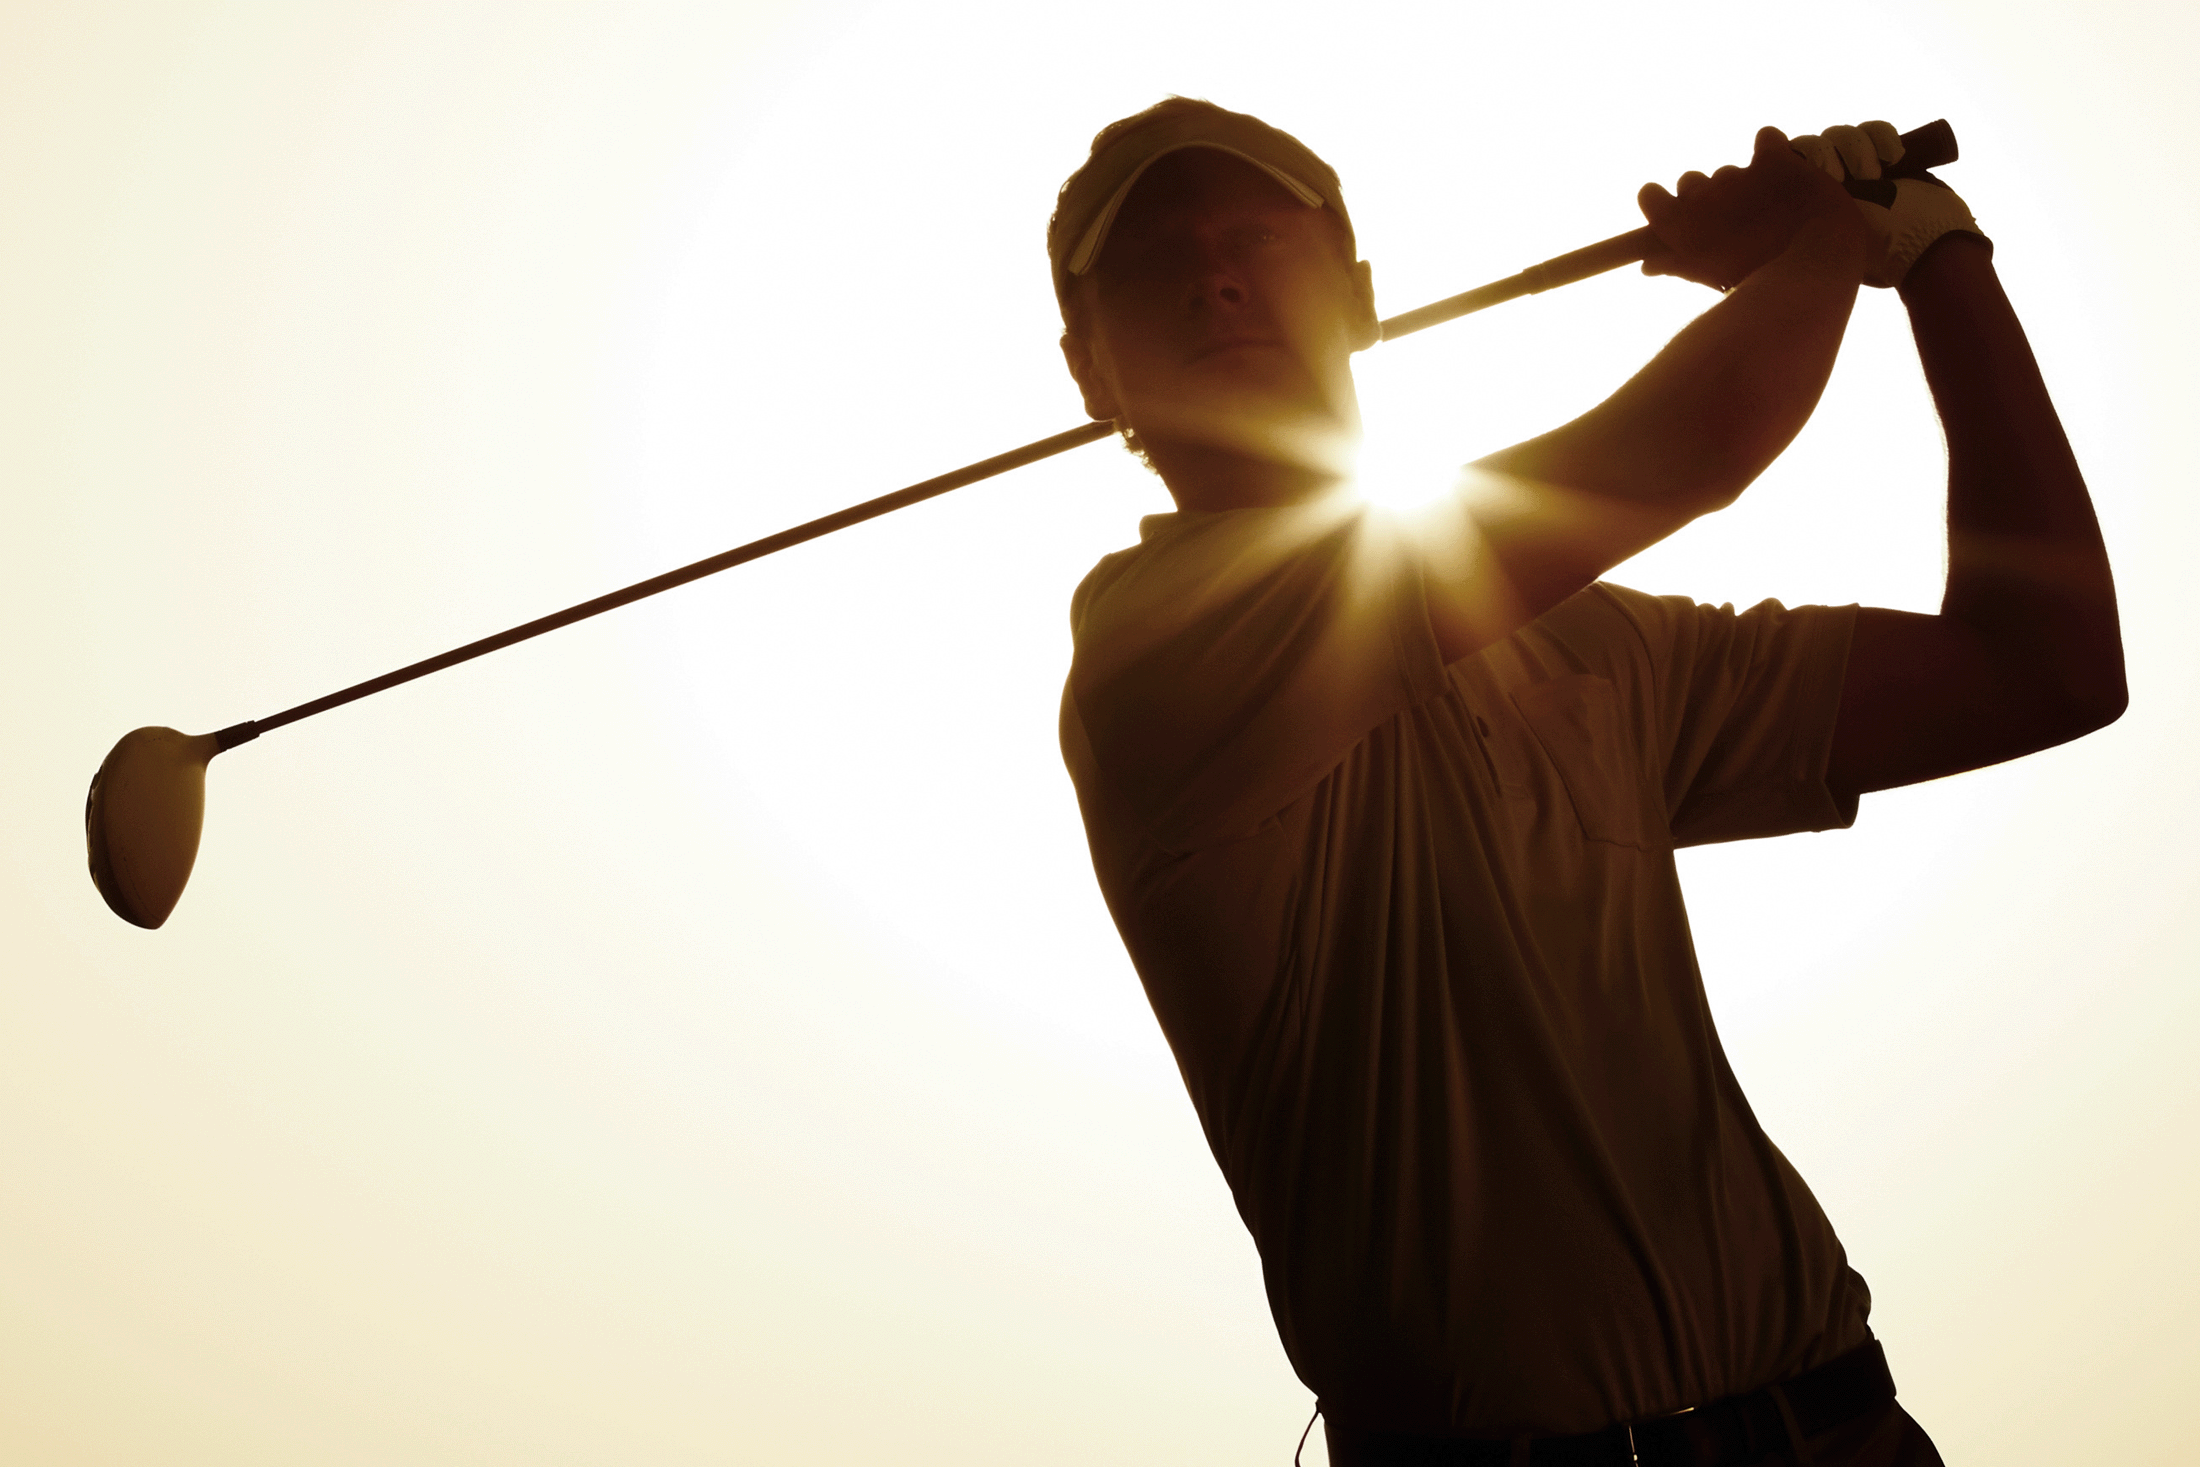 Golfer silhouetted in the sun just after taking a shot